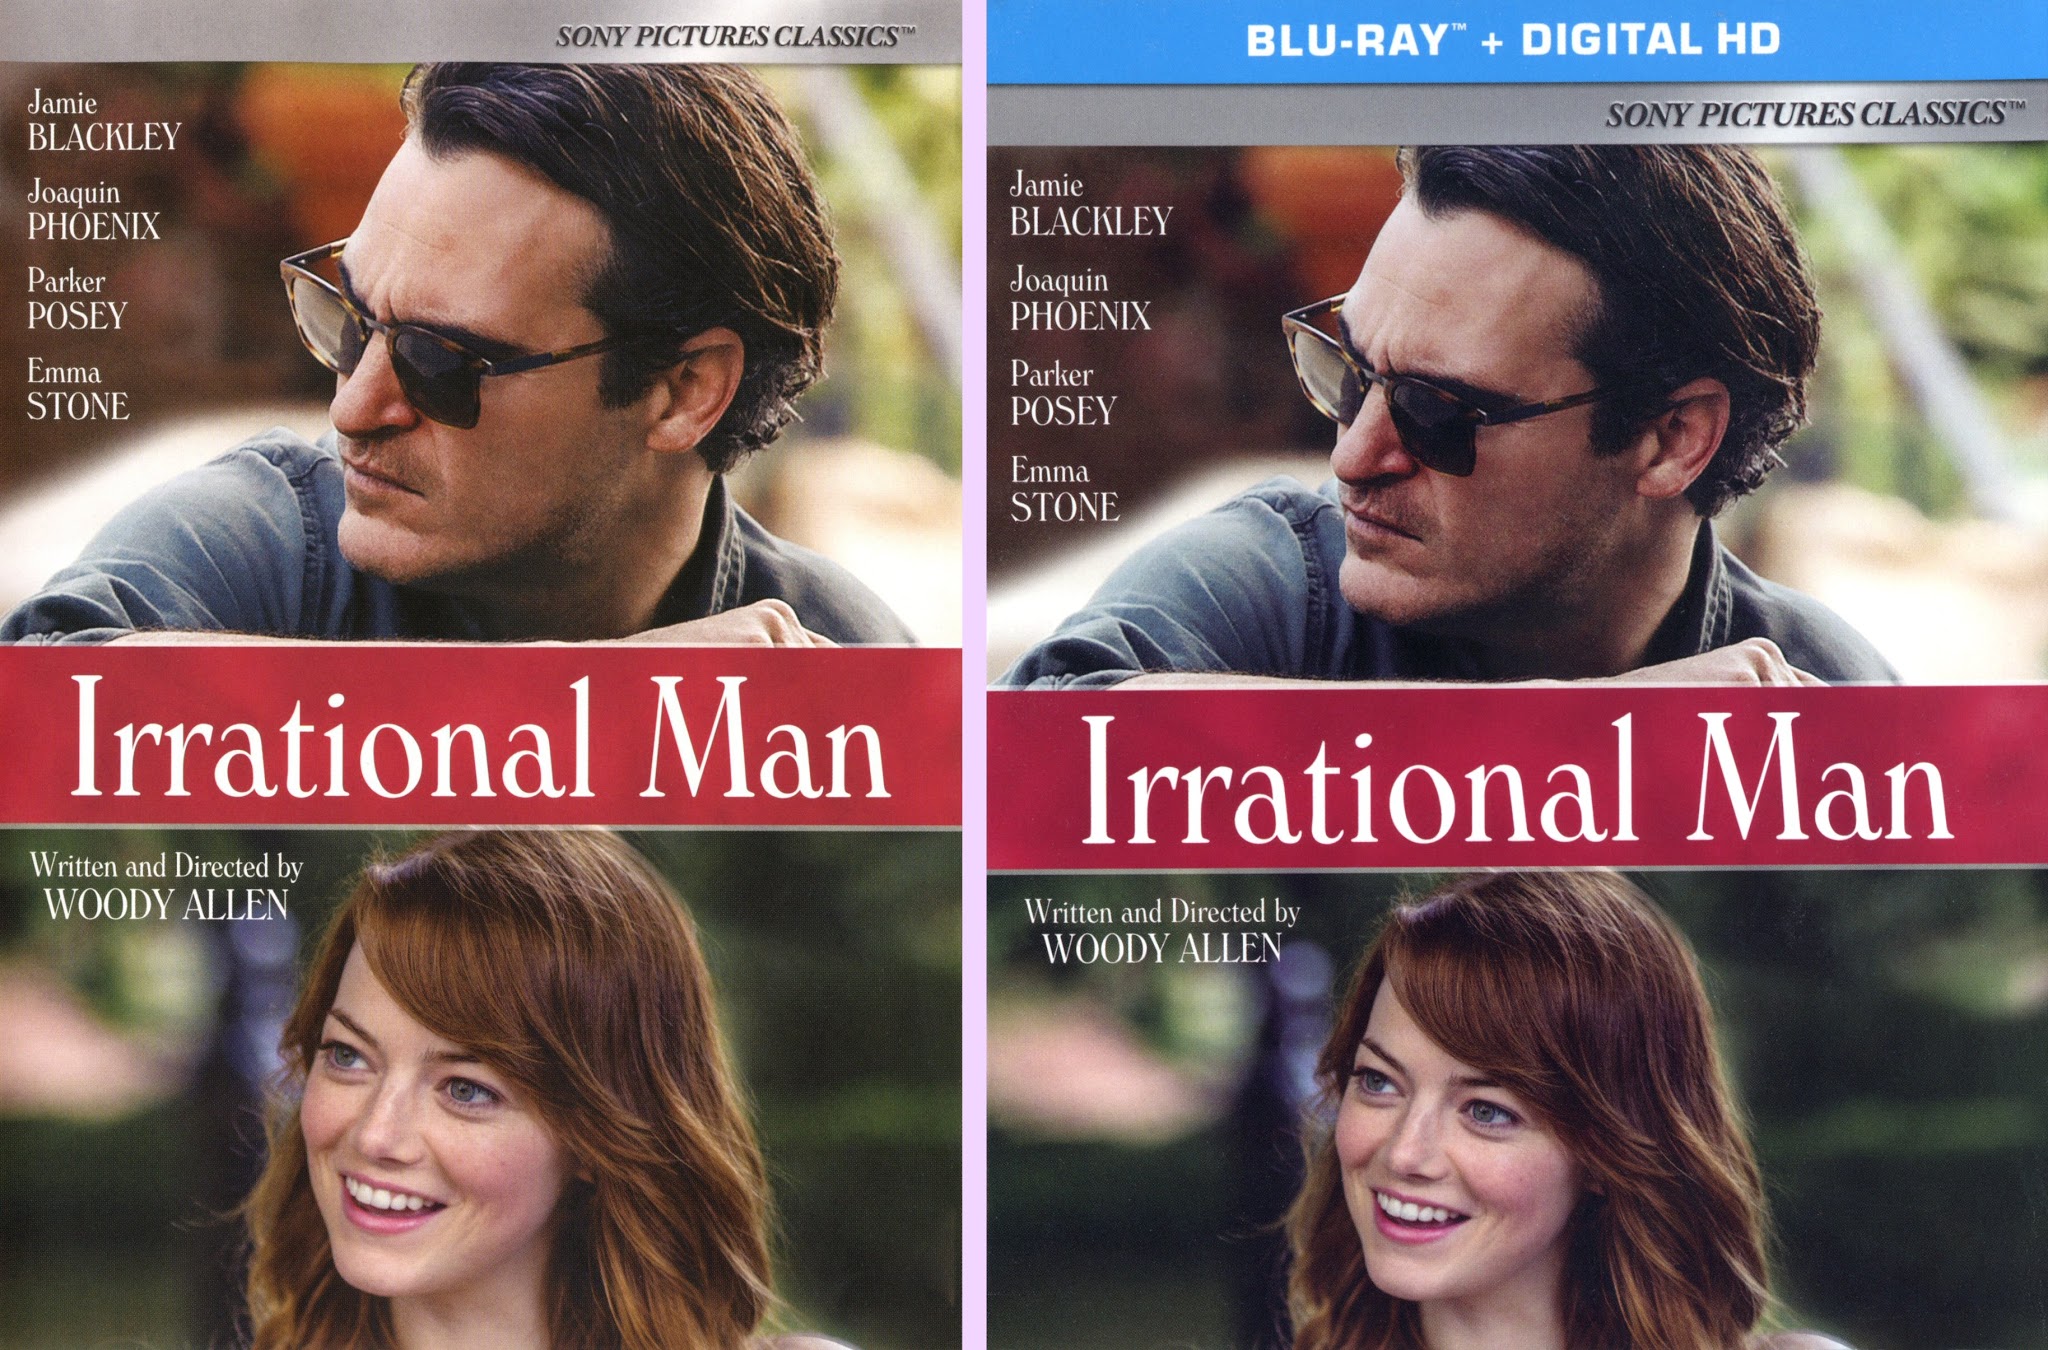 DVD Exotica Woody Allens Irrational Man (DVD/ Blu-ray Comparison) photo